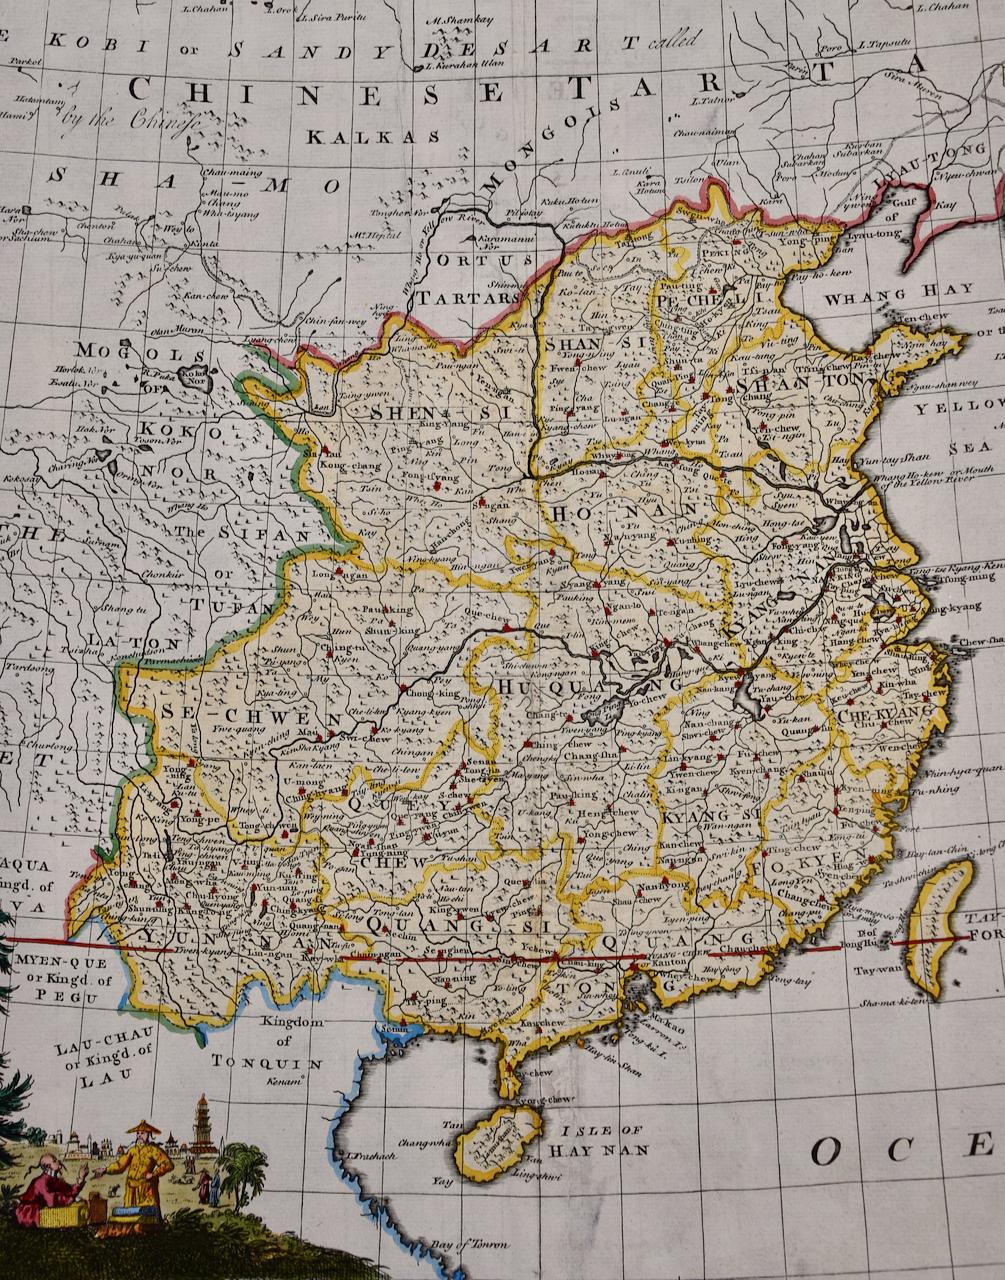 China: An Original 18th Century Hand-colored Map by E. Bowen - Old Masters Print by Emanuel Bowen